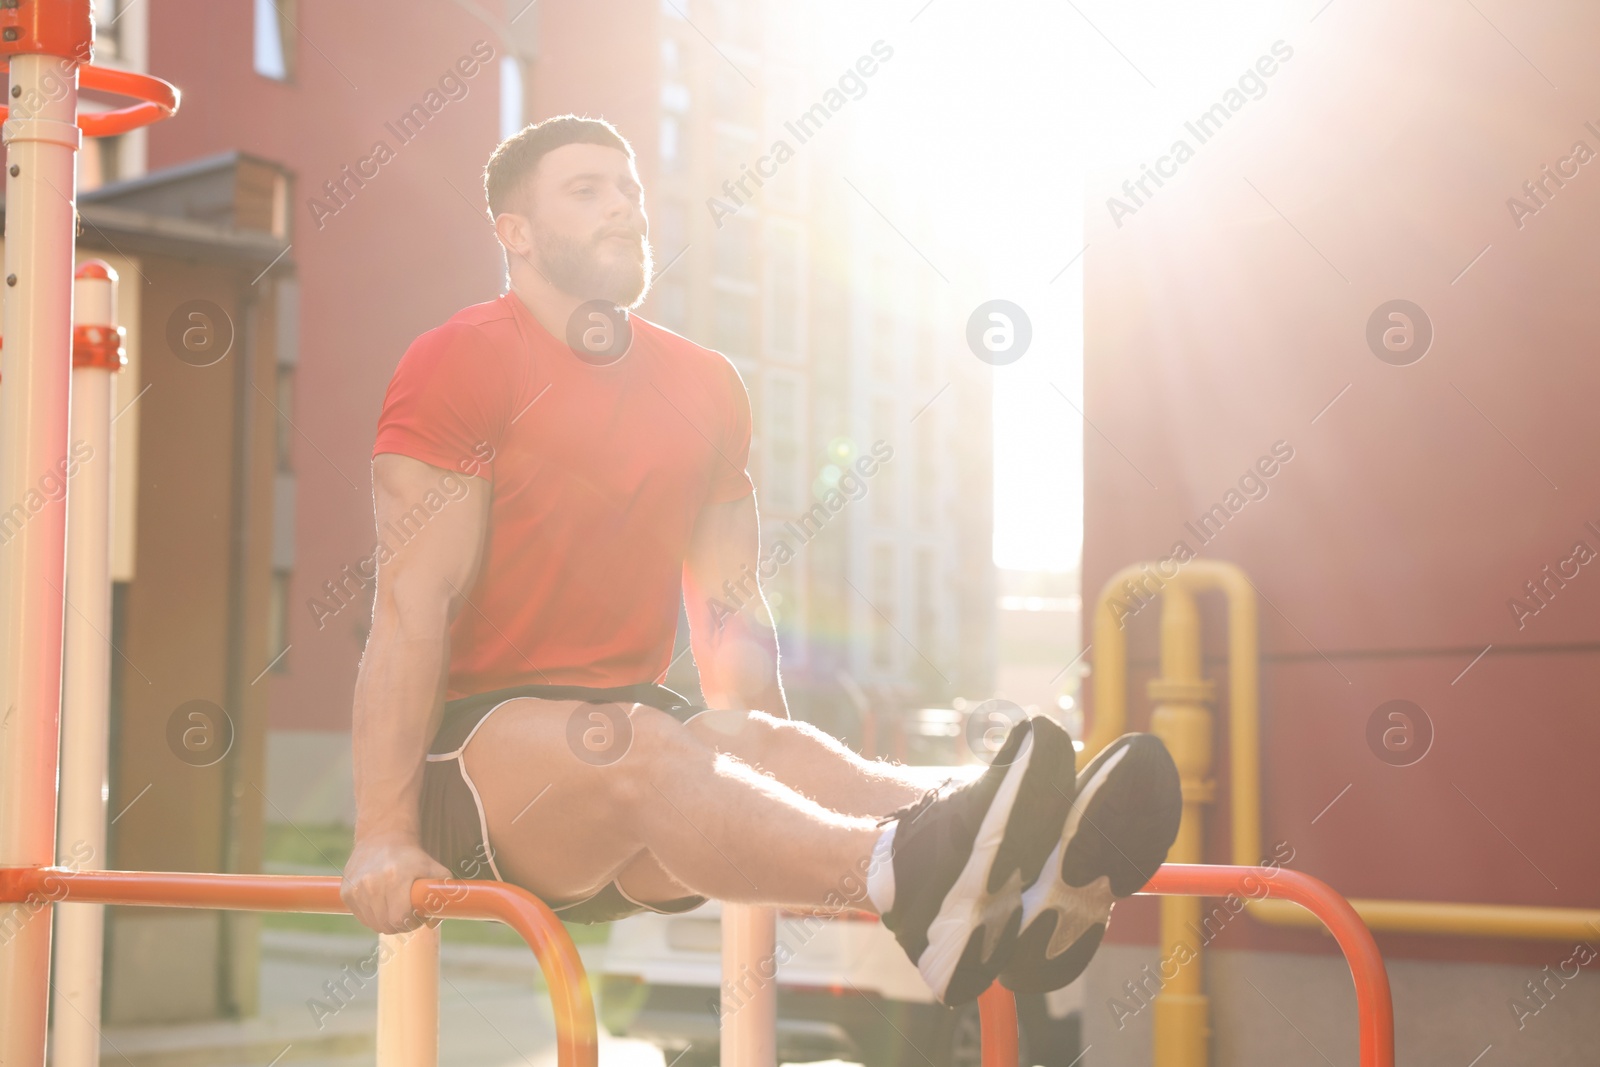 Photo of Man training on parallel bars at outdoor gym on sunny day